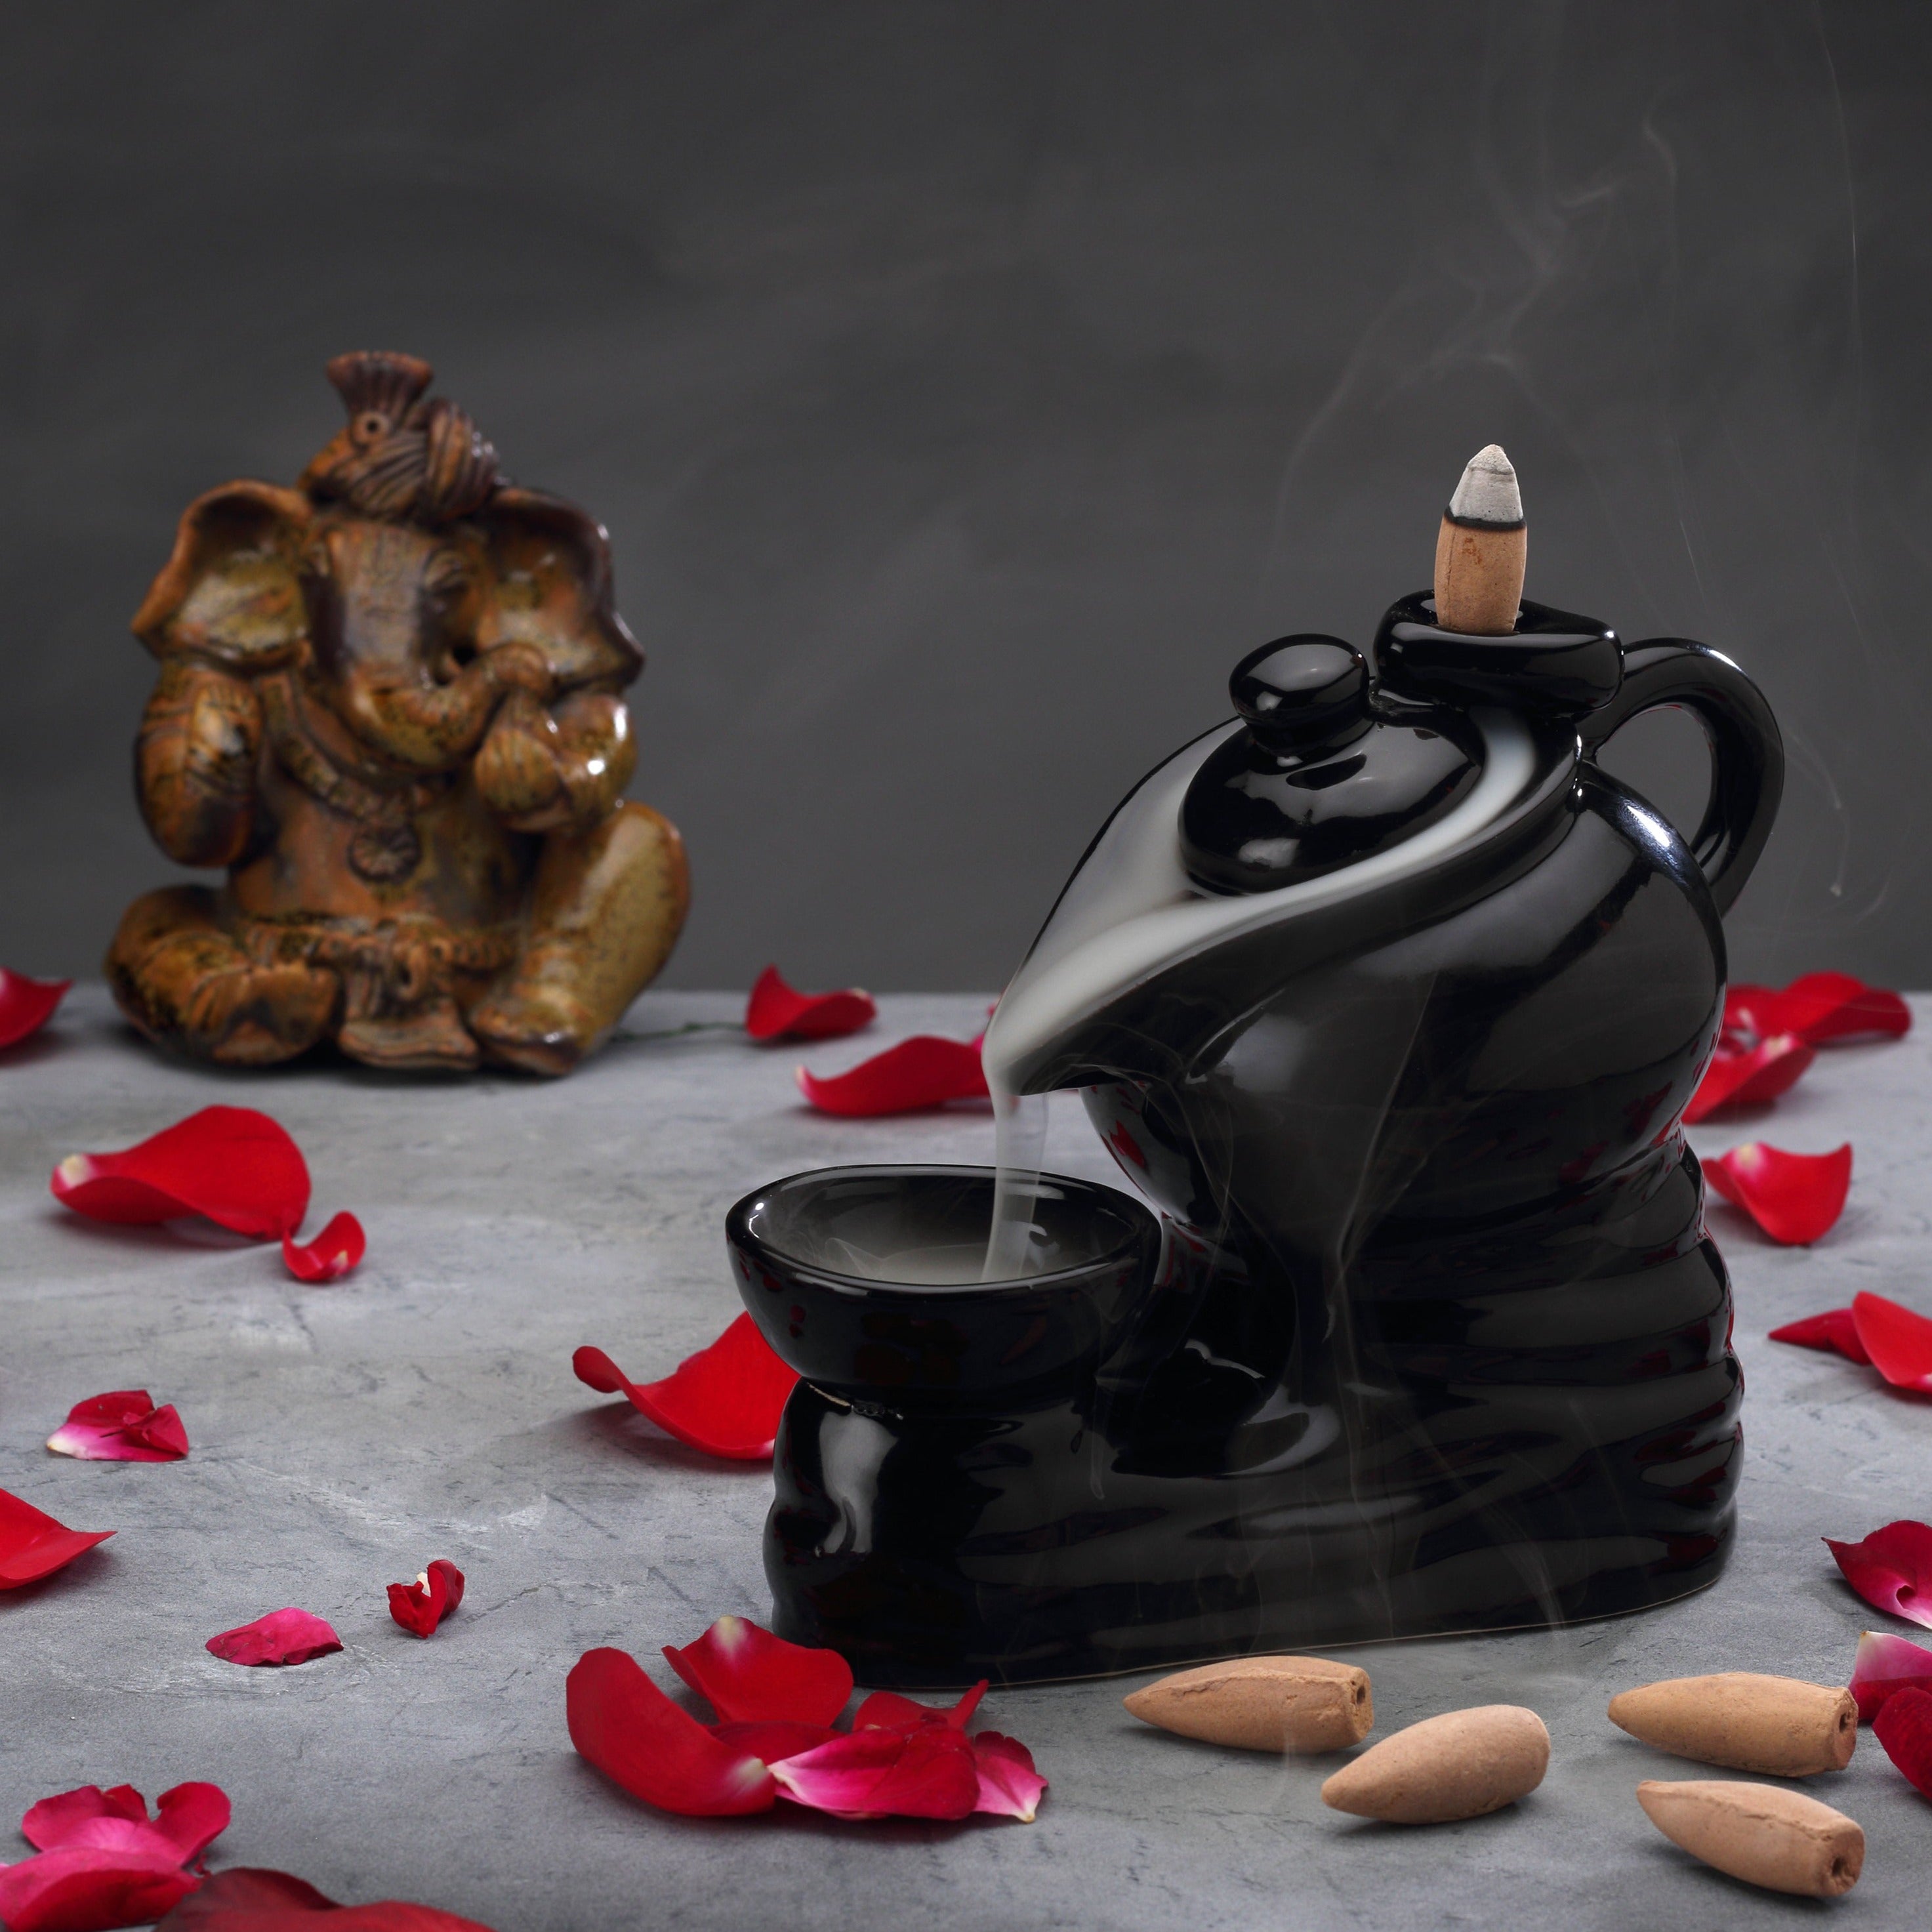 Tea Pot Smoke Fountain Back Flow Incense Burner With 20 Incense Cones